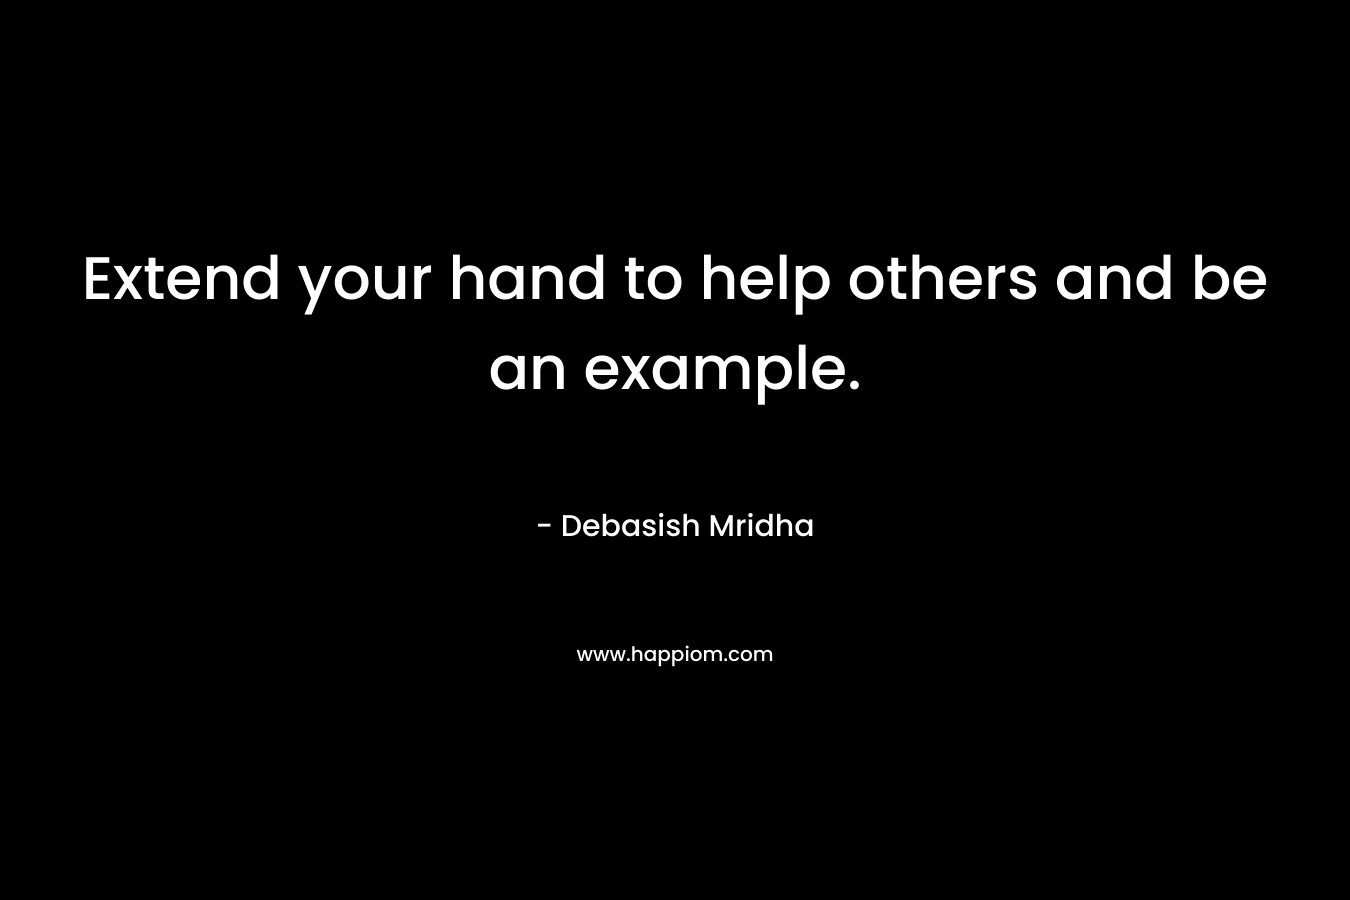 Extend your hand to help others and be an example.